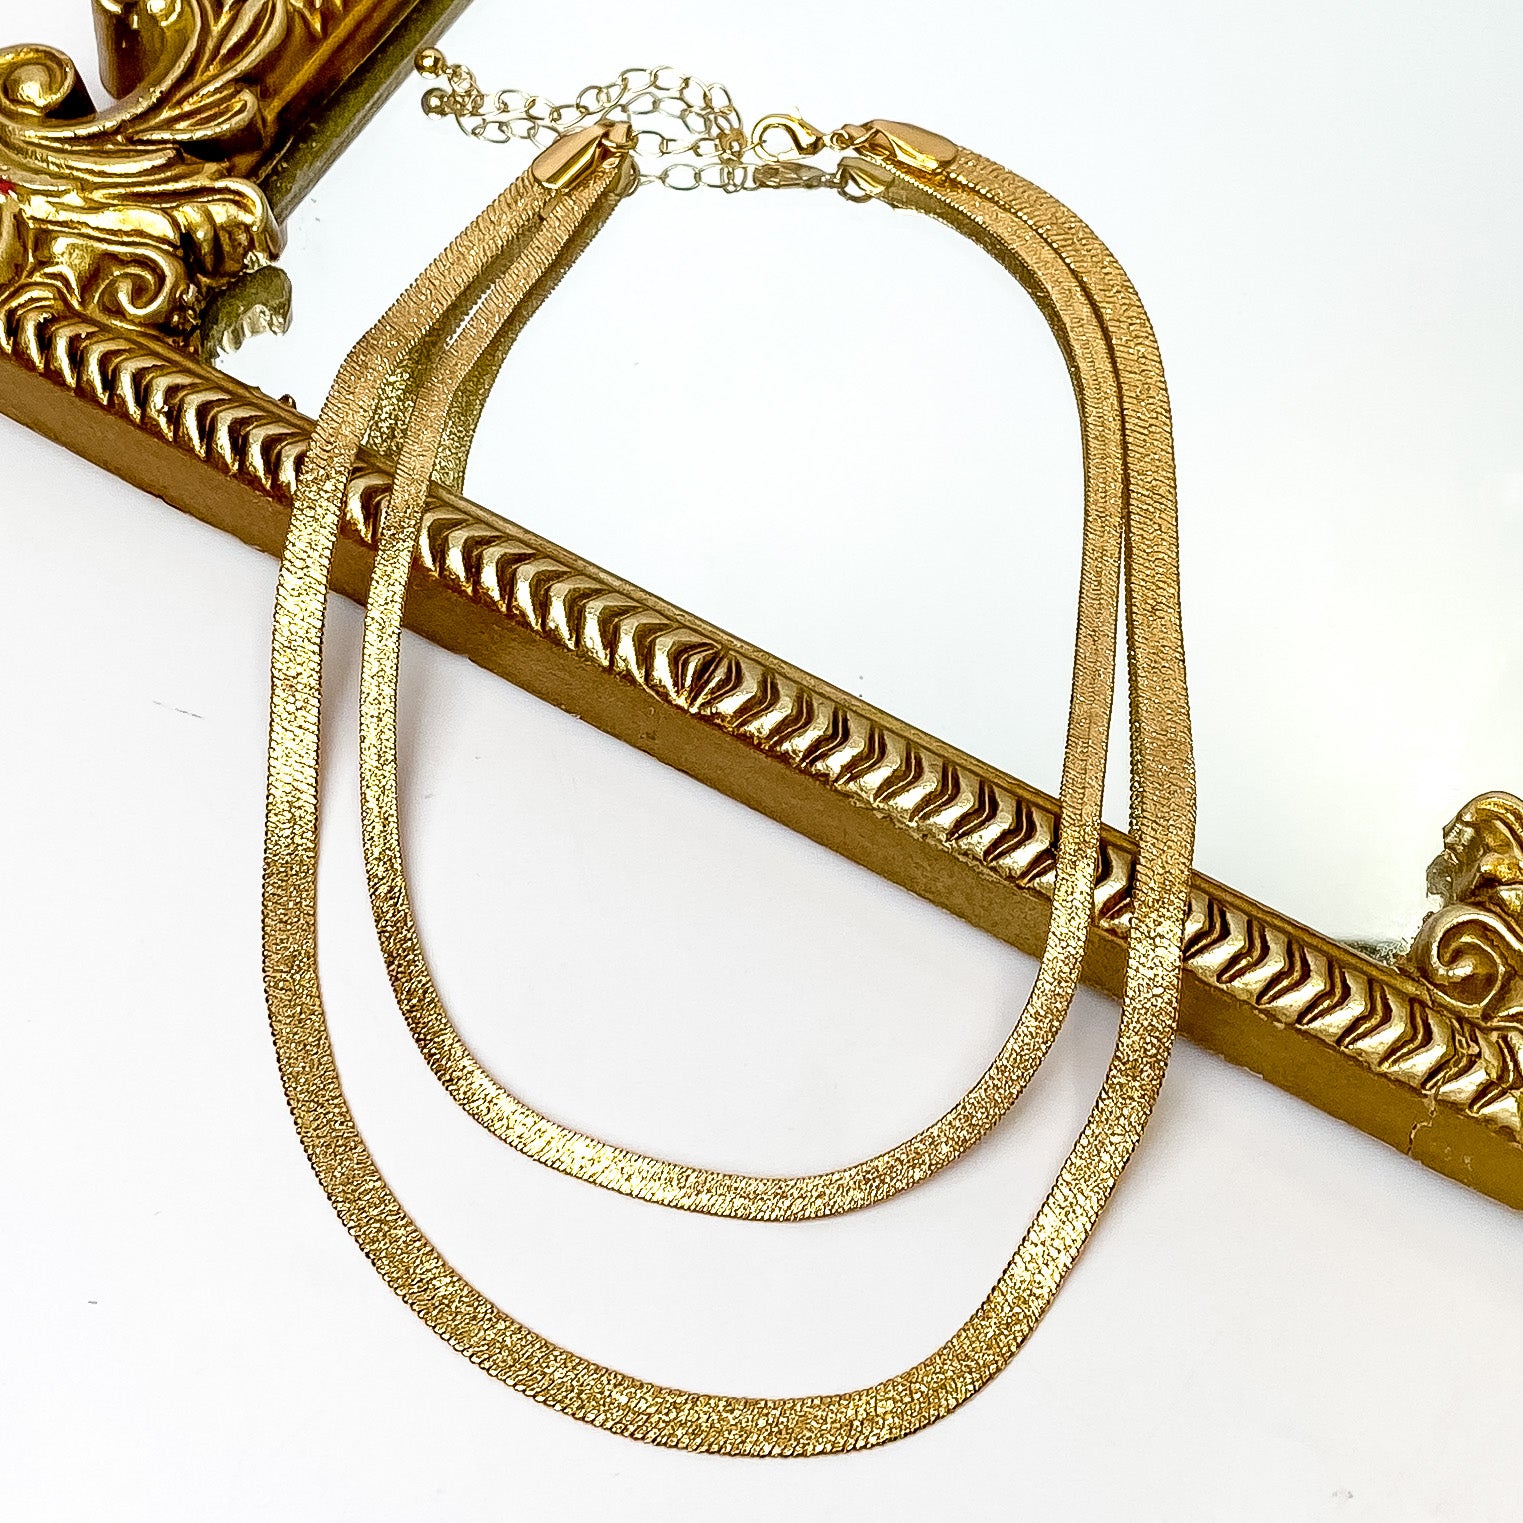 Try to Flirt Layered Herringbone Chain Necklace in Gold Tone - Giddy Up Glamour Boutique